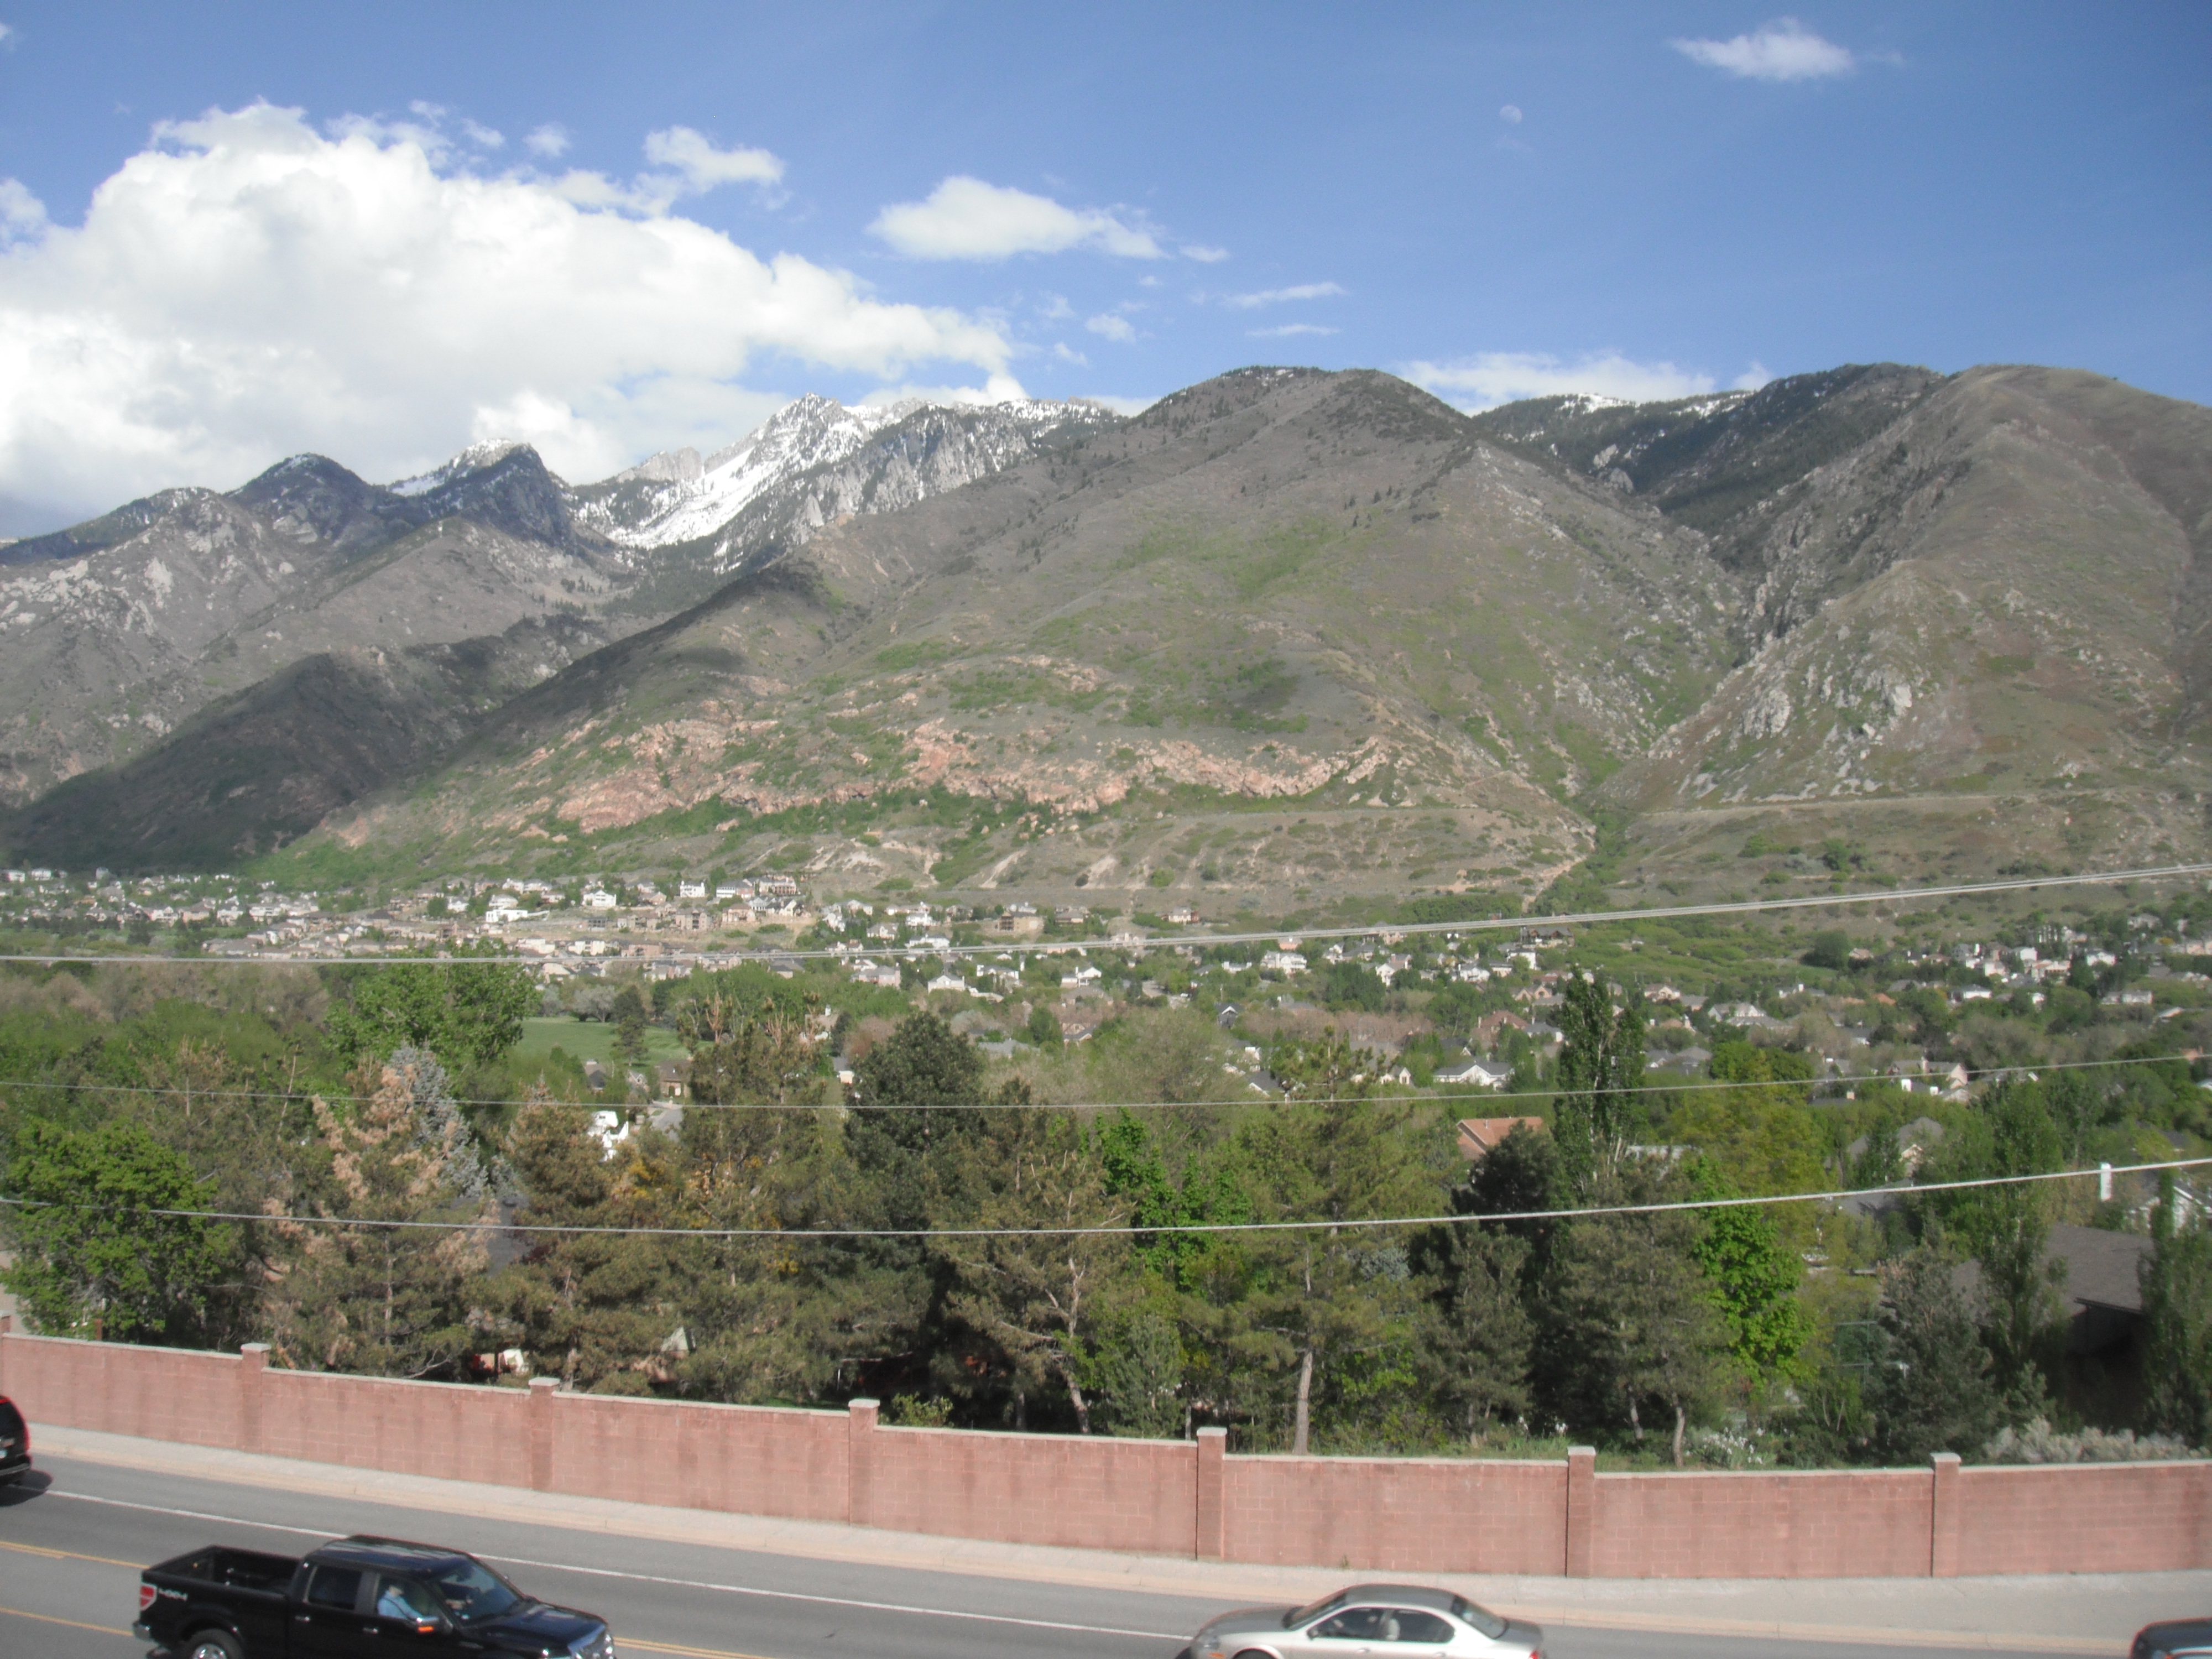 Earthquake Hazard Along the Wasatch Front